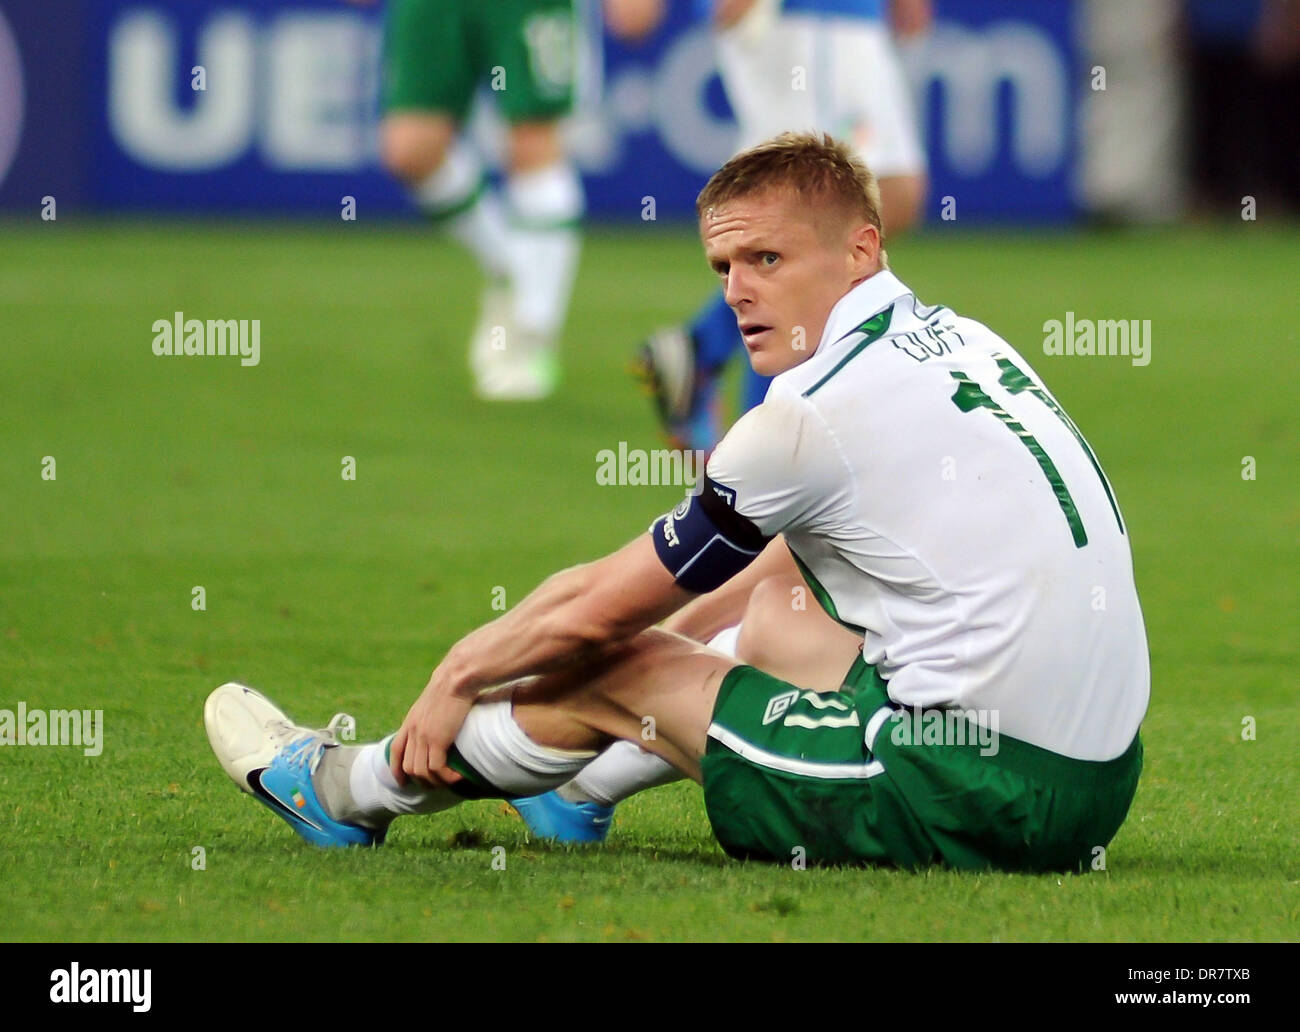 Damien Duff (Fulham FC) in action for Rep of Ireland during the European Championship Group C game between Italy and Ireland at the Municipal Stadium. In Poznan, Poland on June 18, 2012. Italy won the match 2-0 Poznan, Poland - 18.06.12 Stock Photo